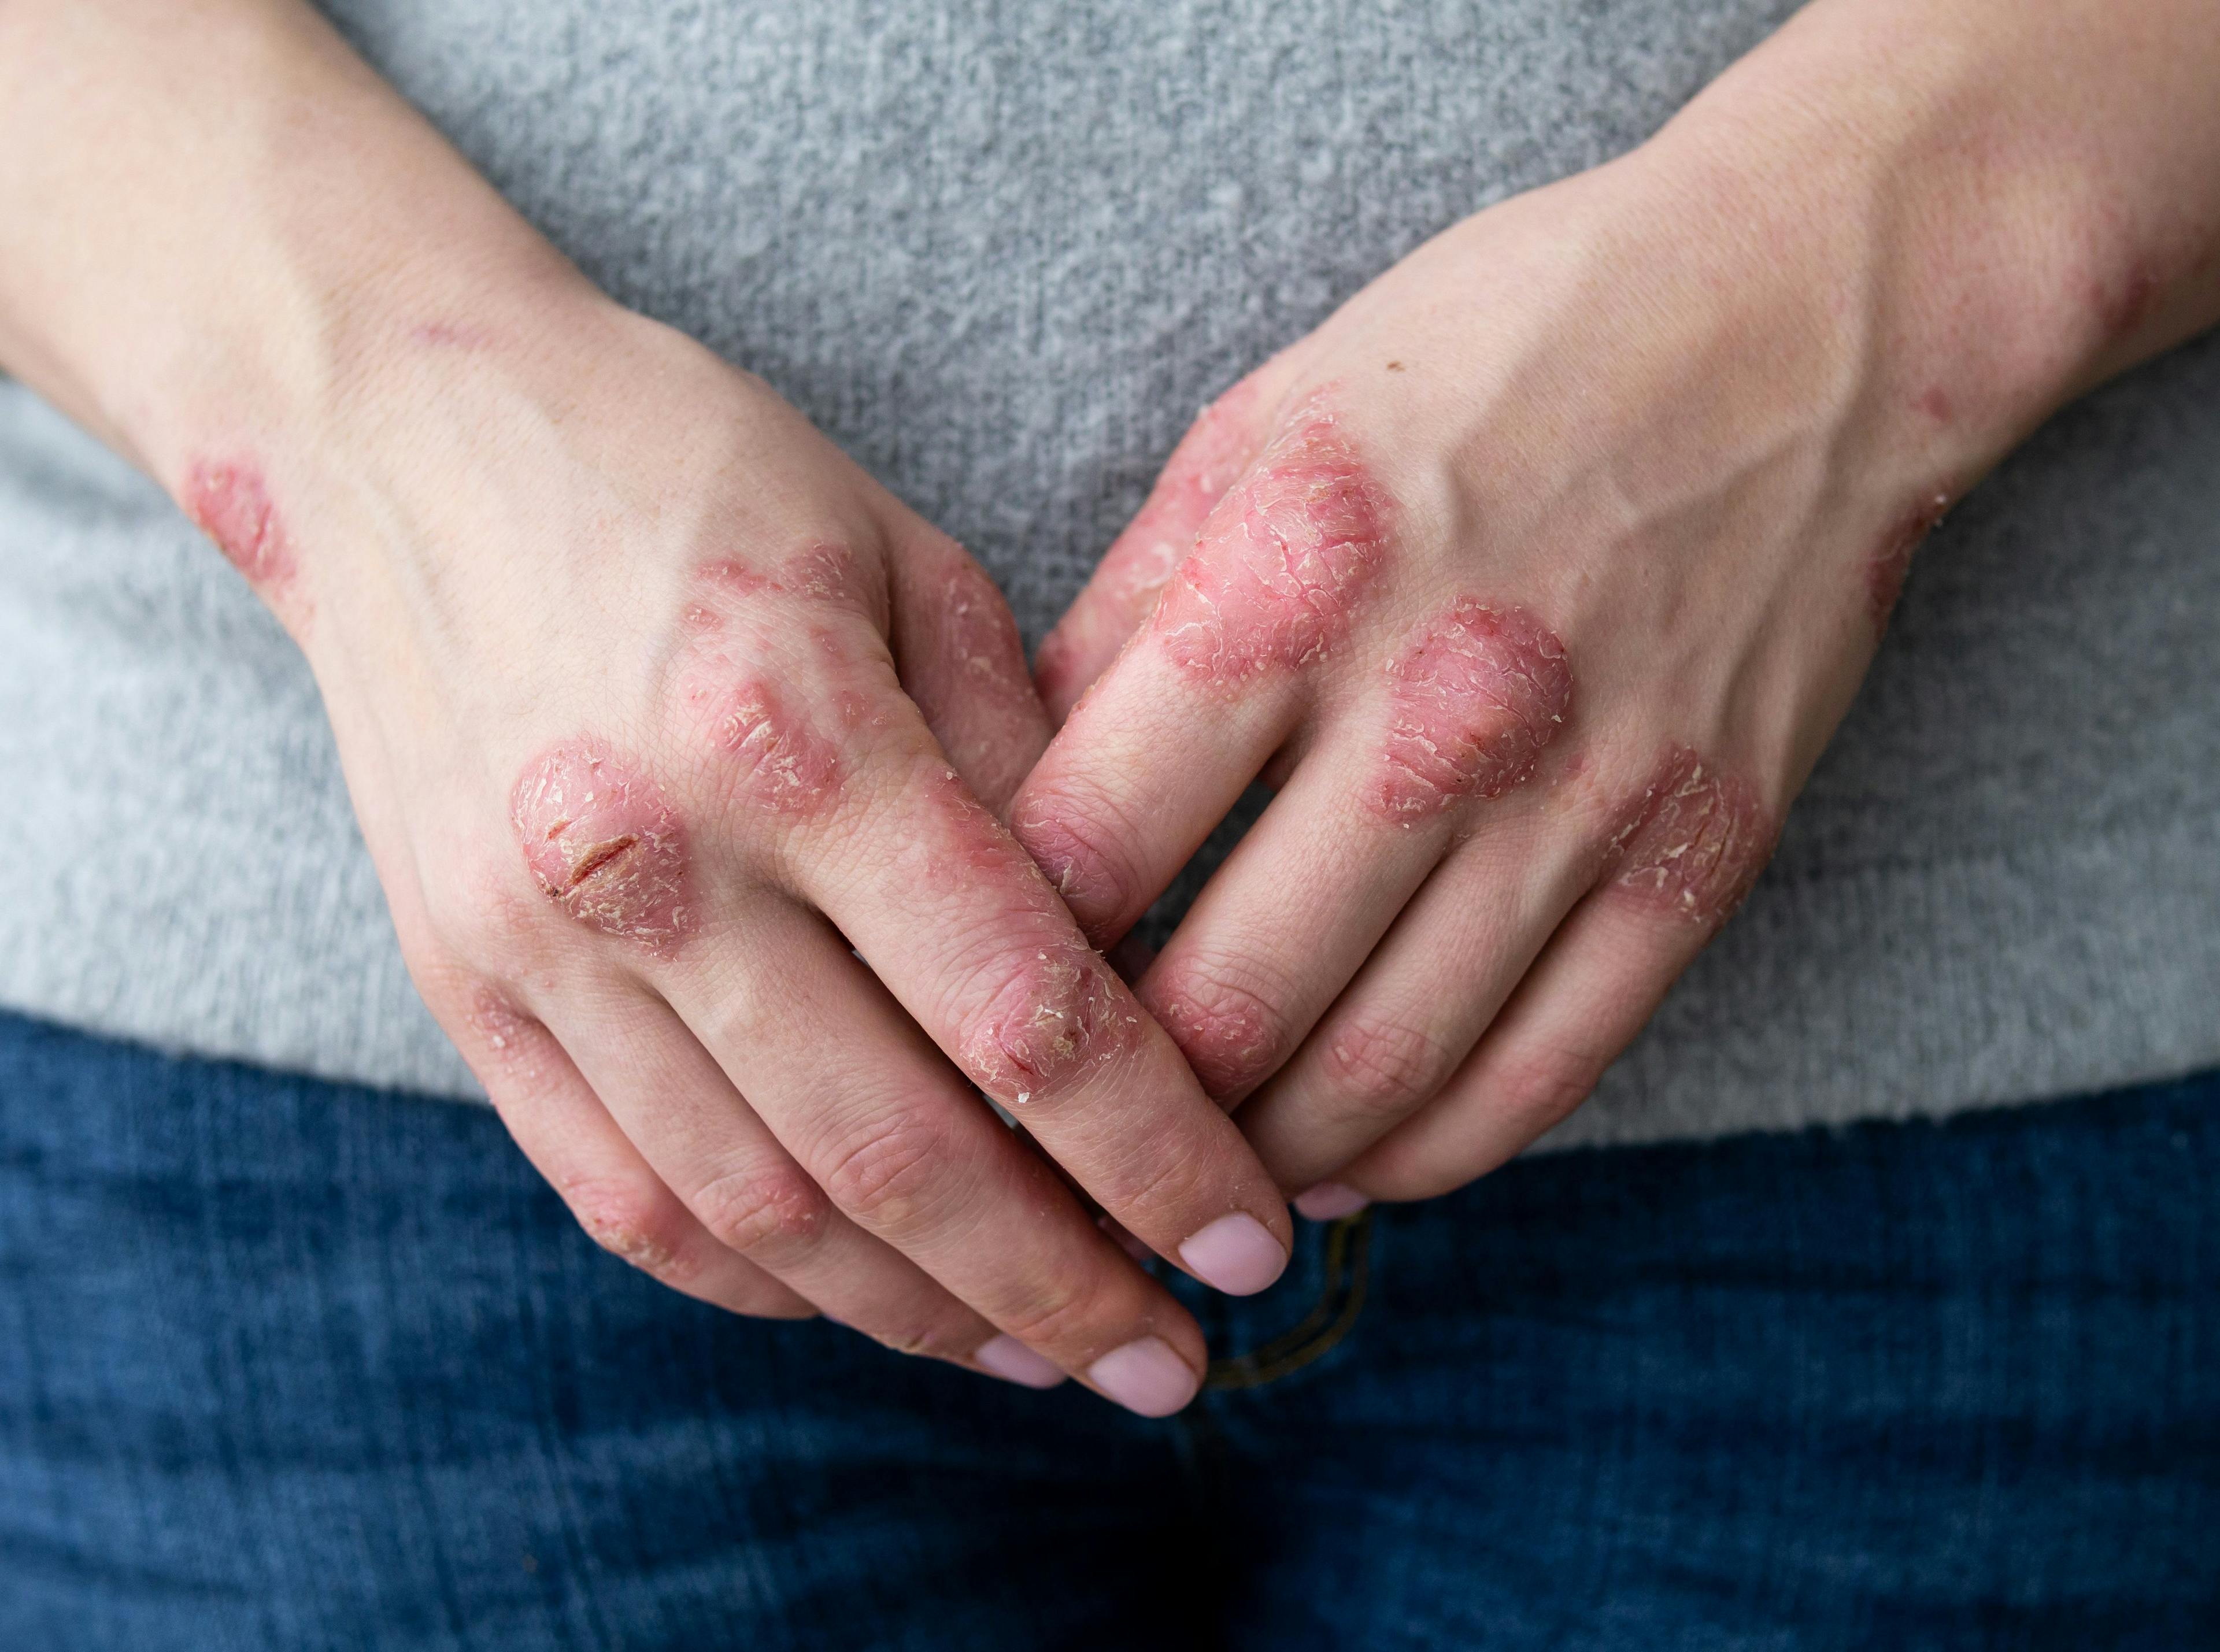 Efficacy of Risankizumab For Severe Psoriasis